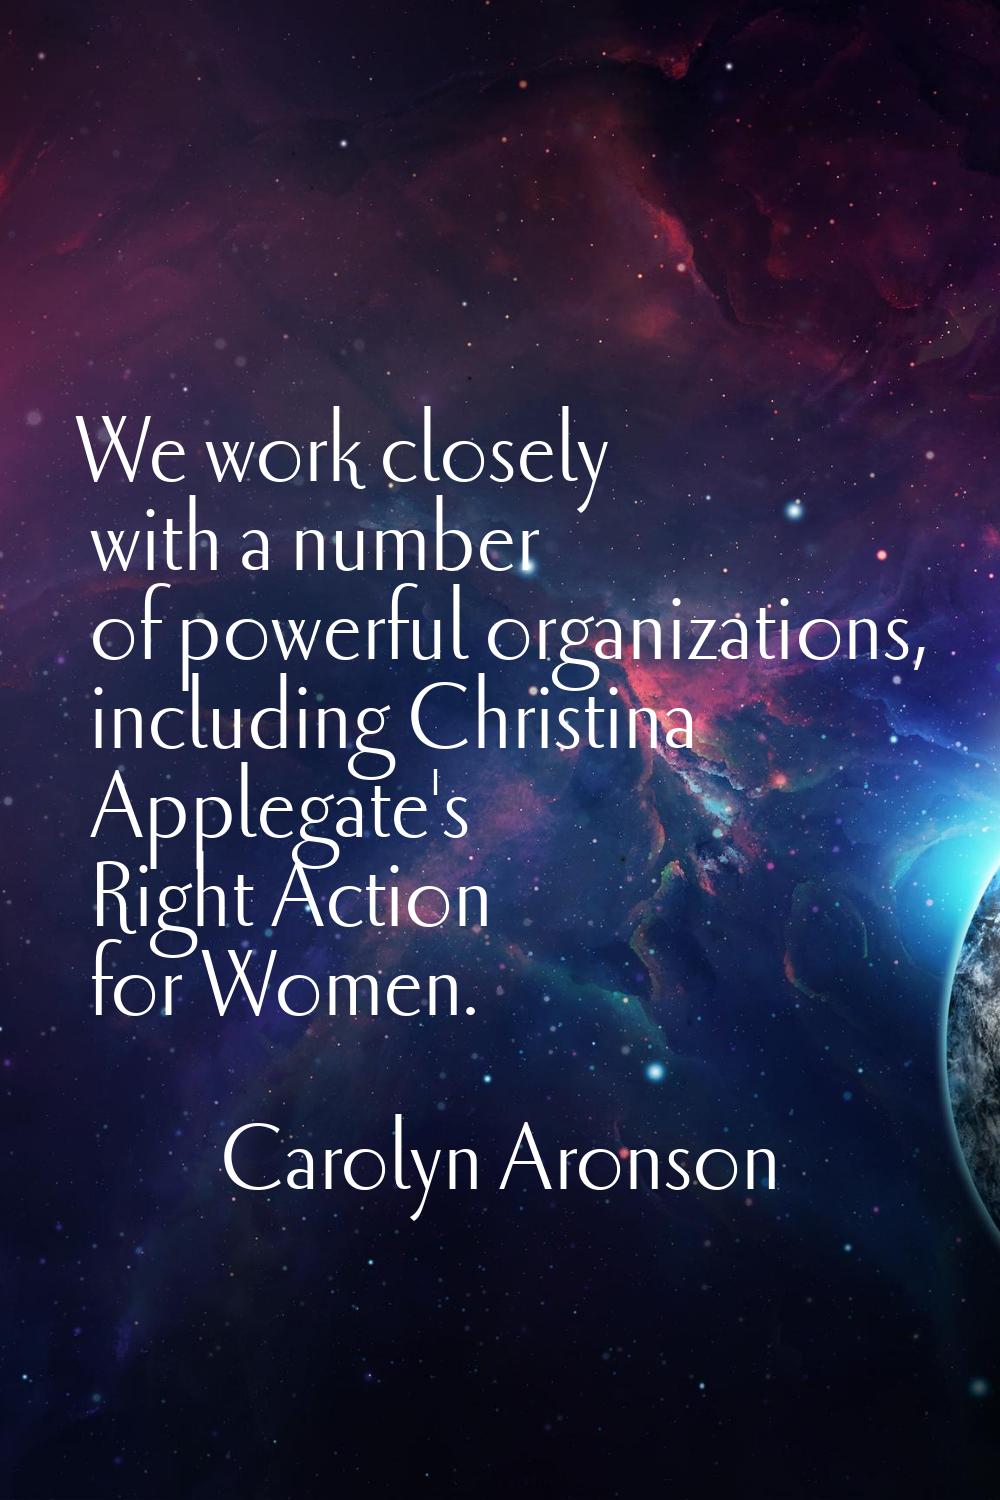 We work closely with a number of powerful organizations, including Christina Applegate's Right Acti